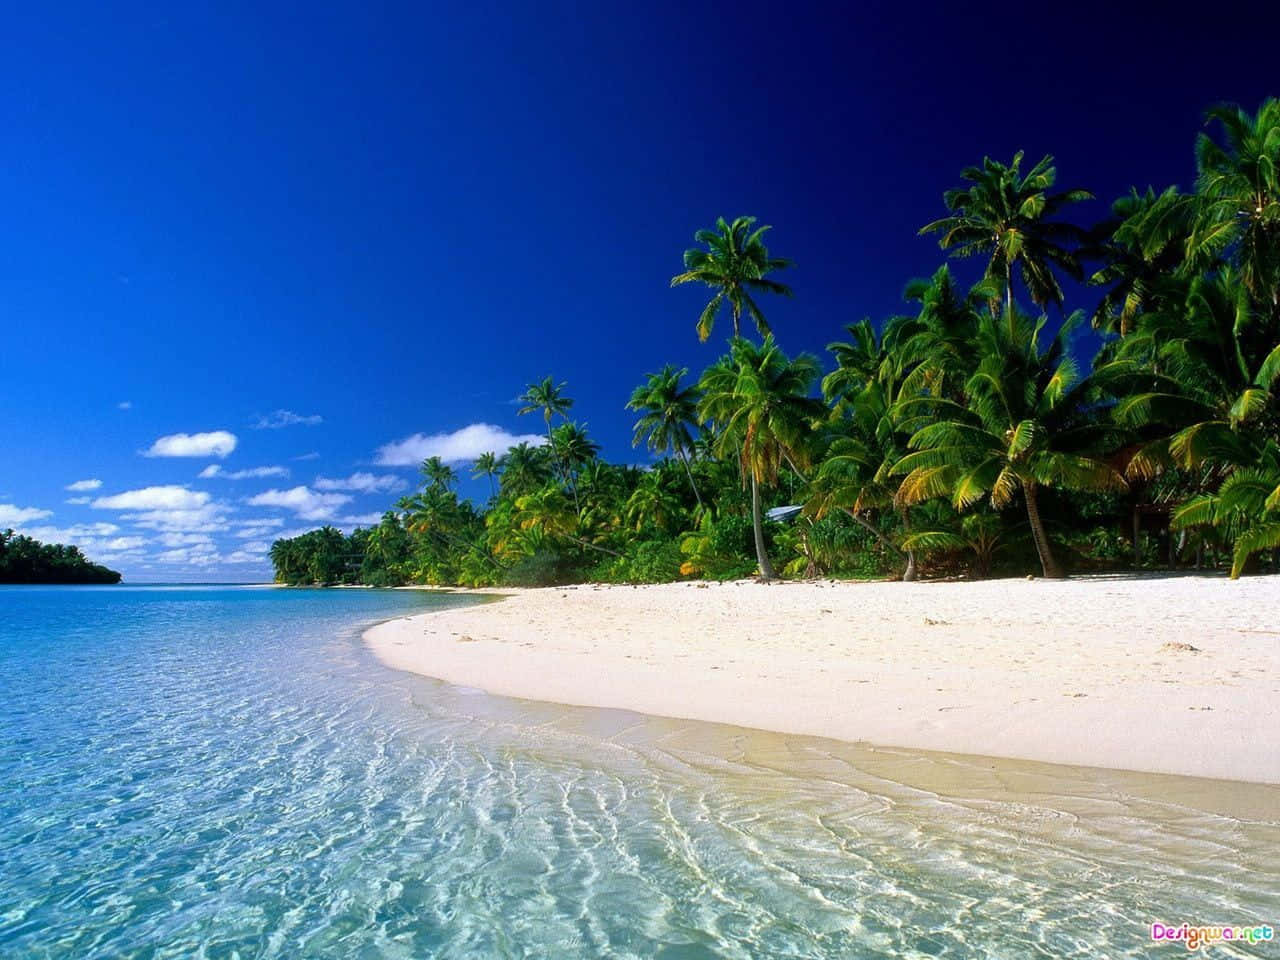 720p Beach Tropical Waters Background